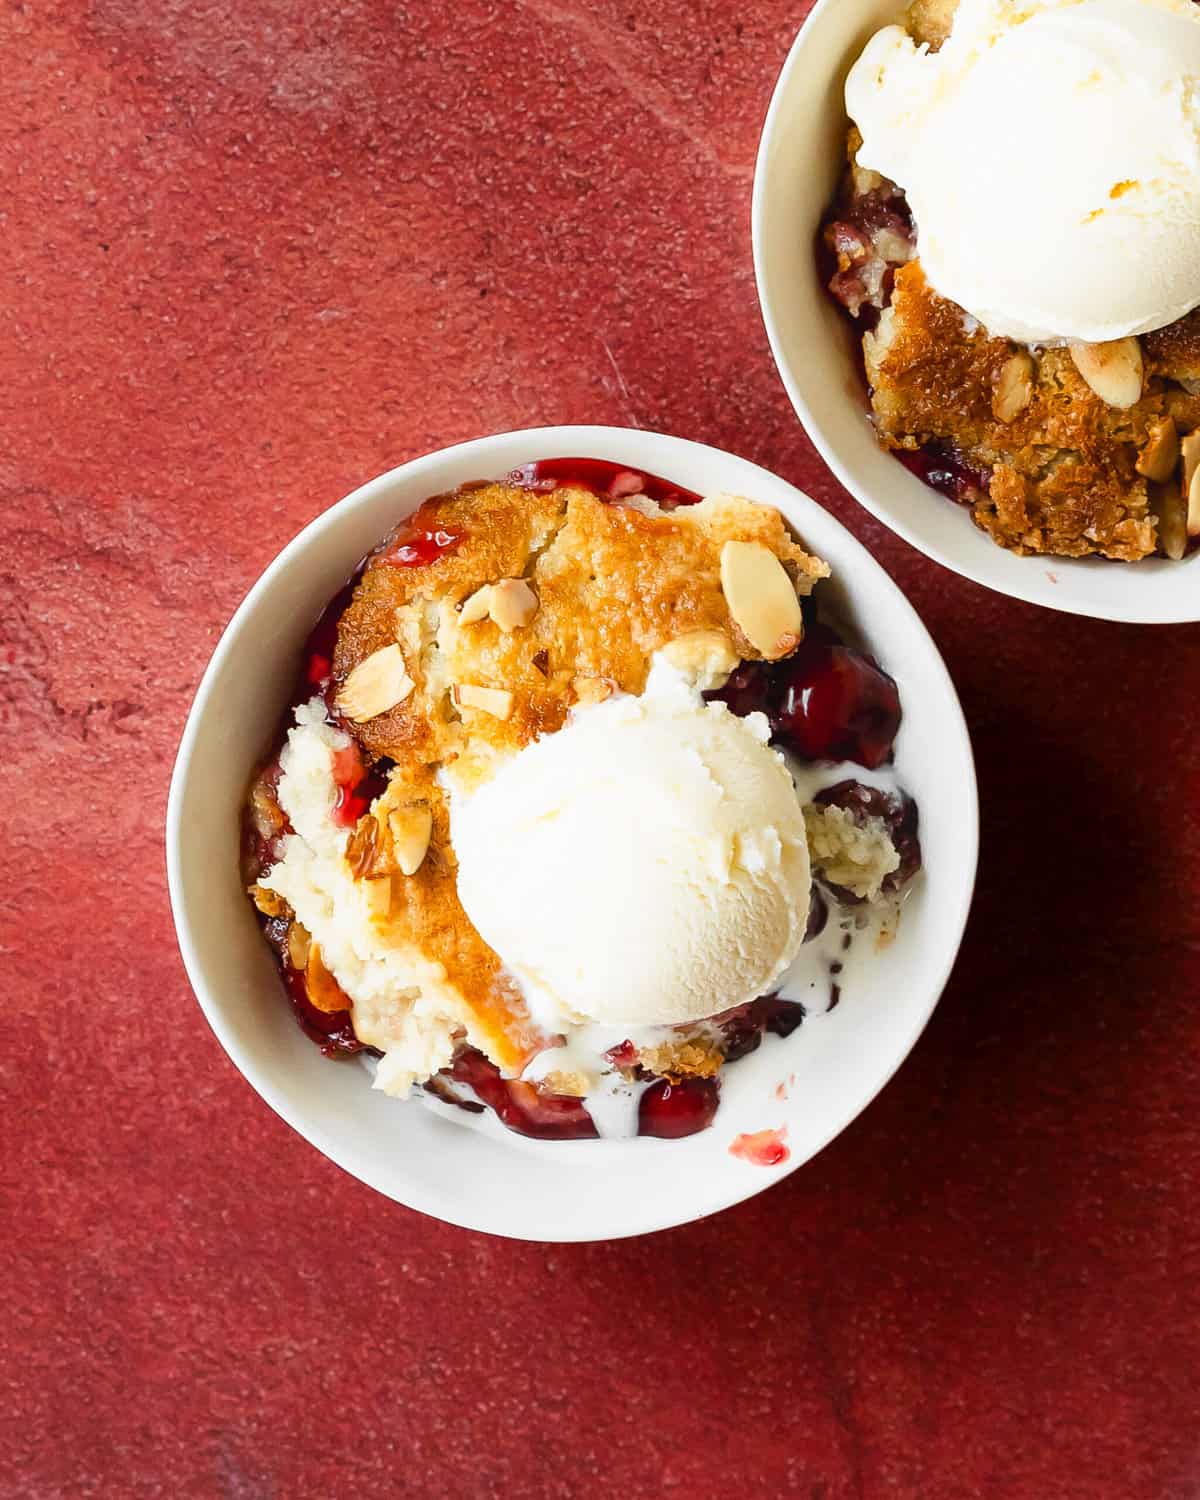 Cherry dump cake is an easy to make cherry cobbler with cake mix dessert. This recipe for cherry dump cake comes together quickly with pantry basics such as cake mix, cherry pie filling, canned or fresh cherries and butter. Top this cherry cobbler dump cake with vanilla ice cream for the perfect easy baked dessert.